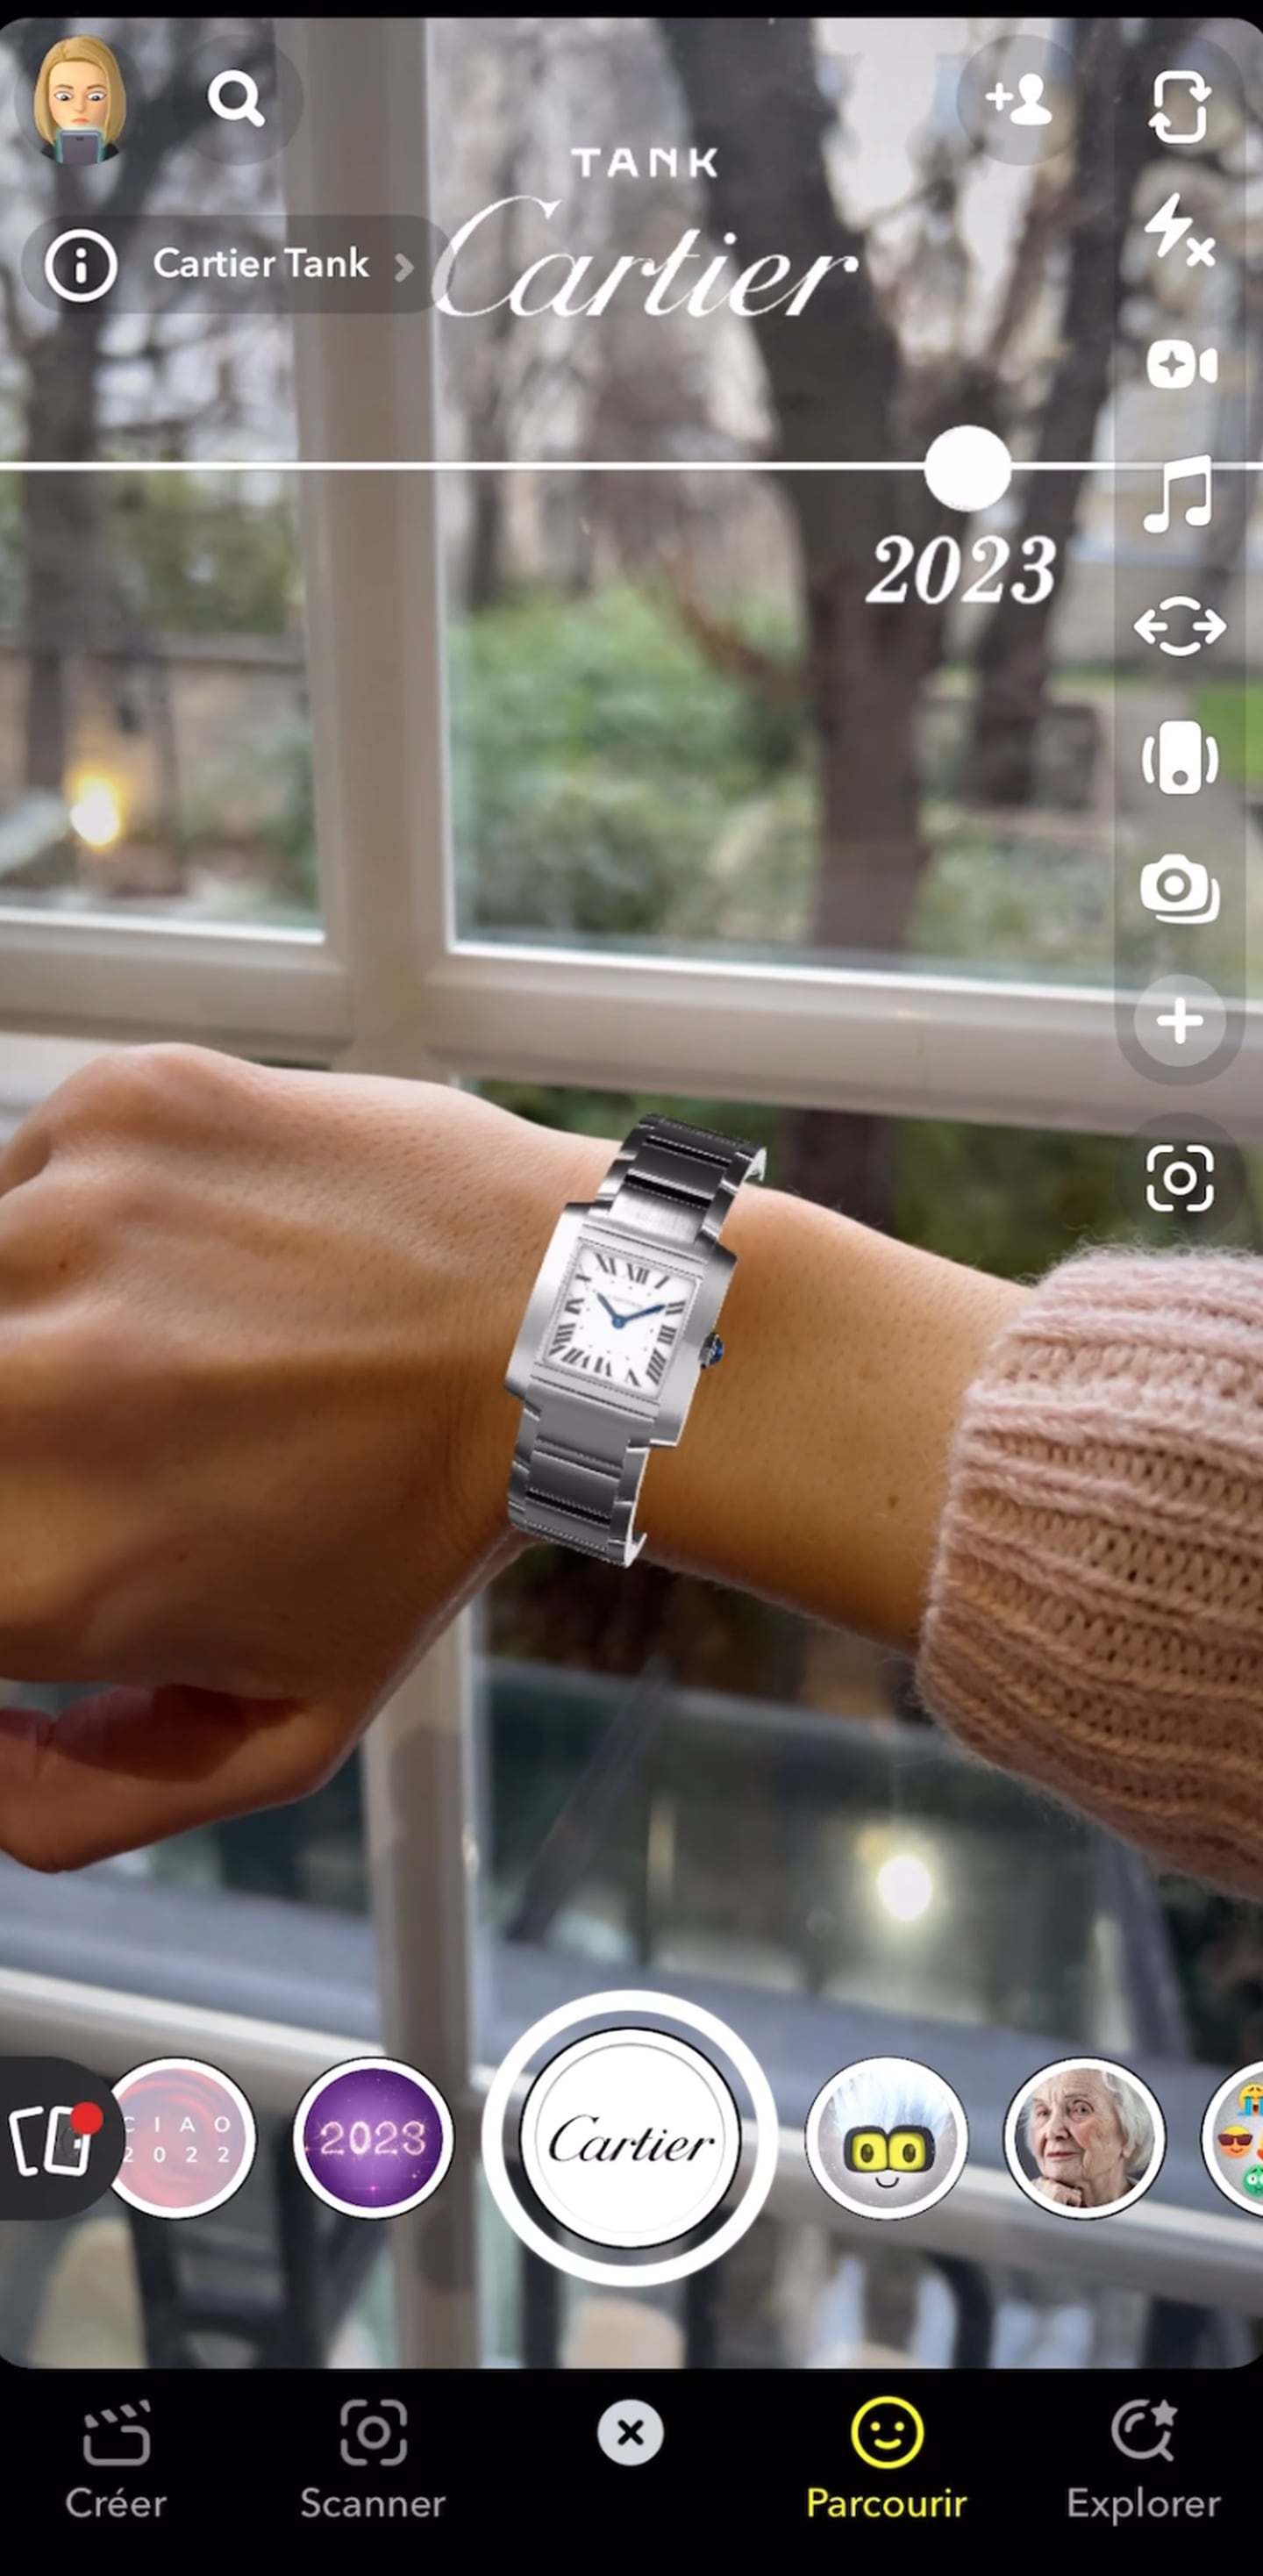 A virtual version of the Tank watch appears on a model's wrist in Snapchat.